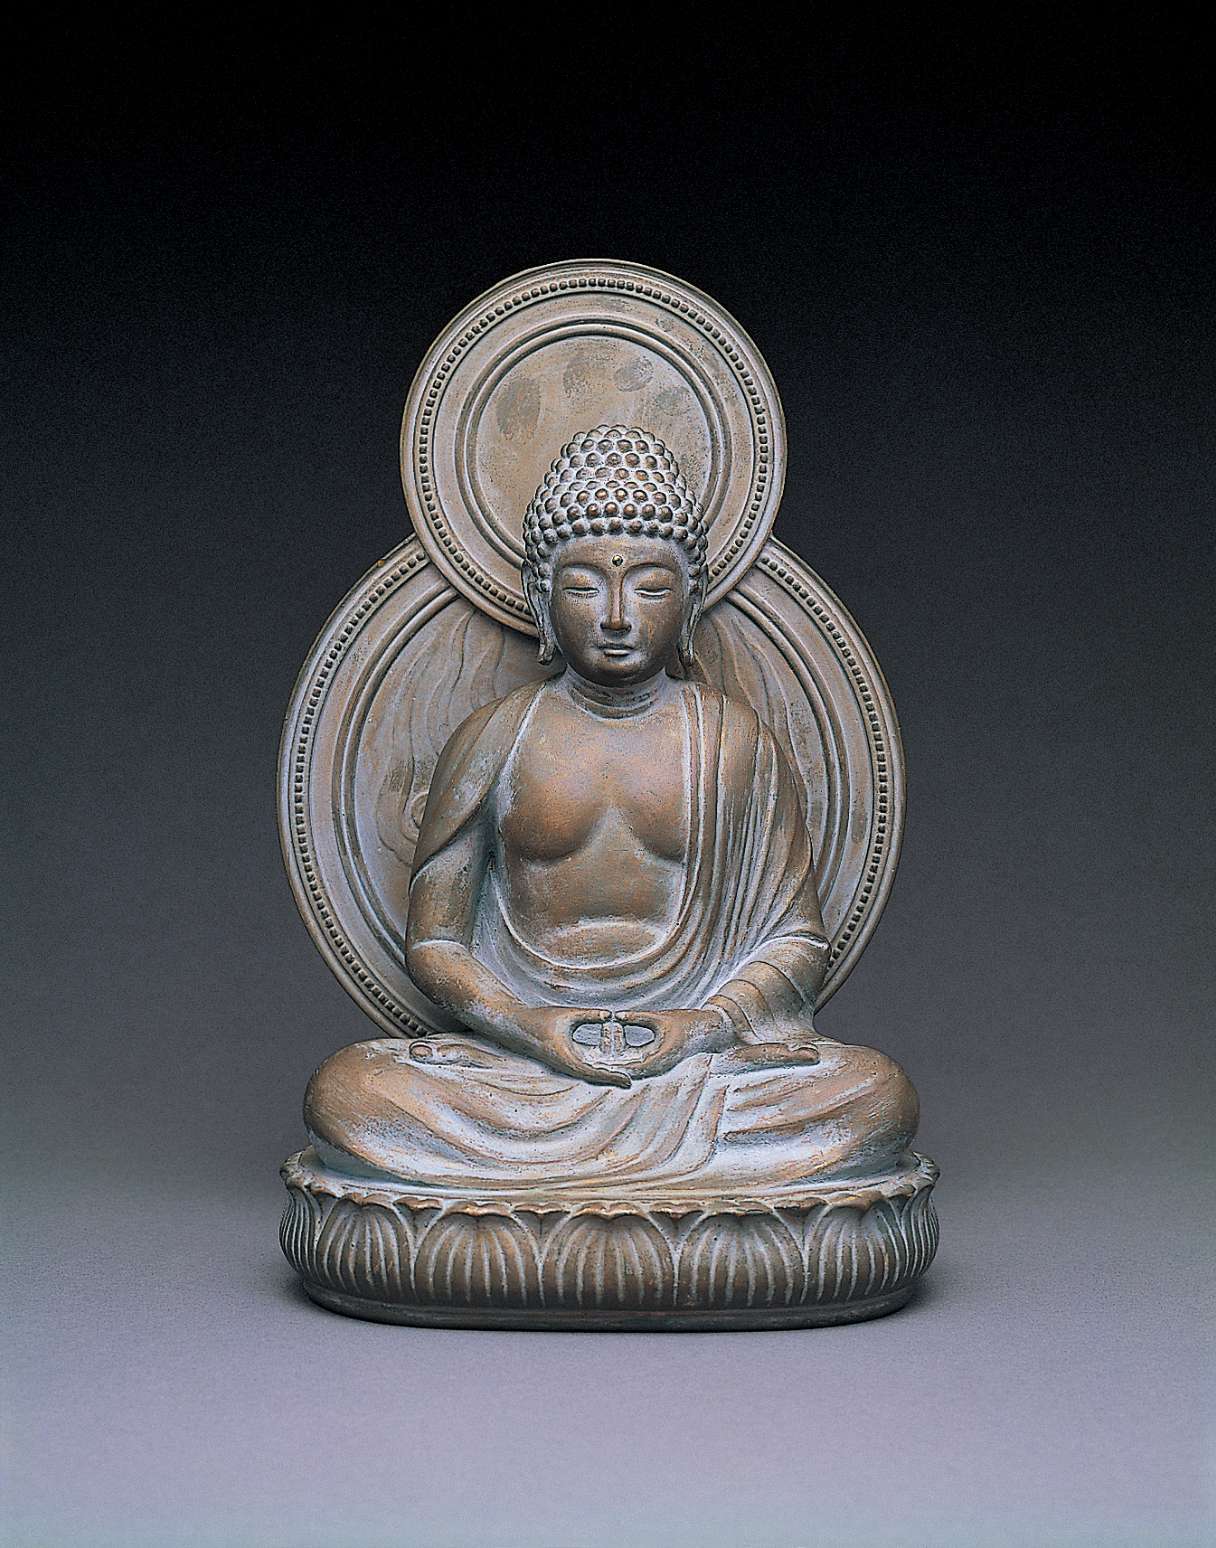 A matte, gray hued statue of a buddha seated cross-legged atop curving lotus petals, with a circular nimbus behind his body, hands in meditation. The nimbus behind the head shows some discoloration.